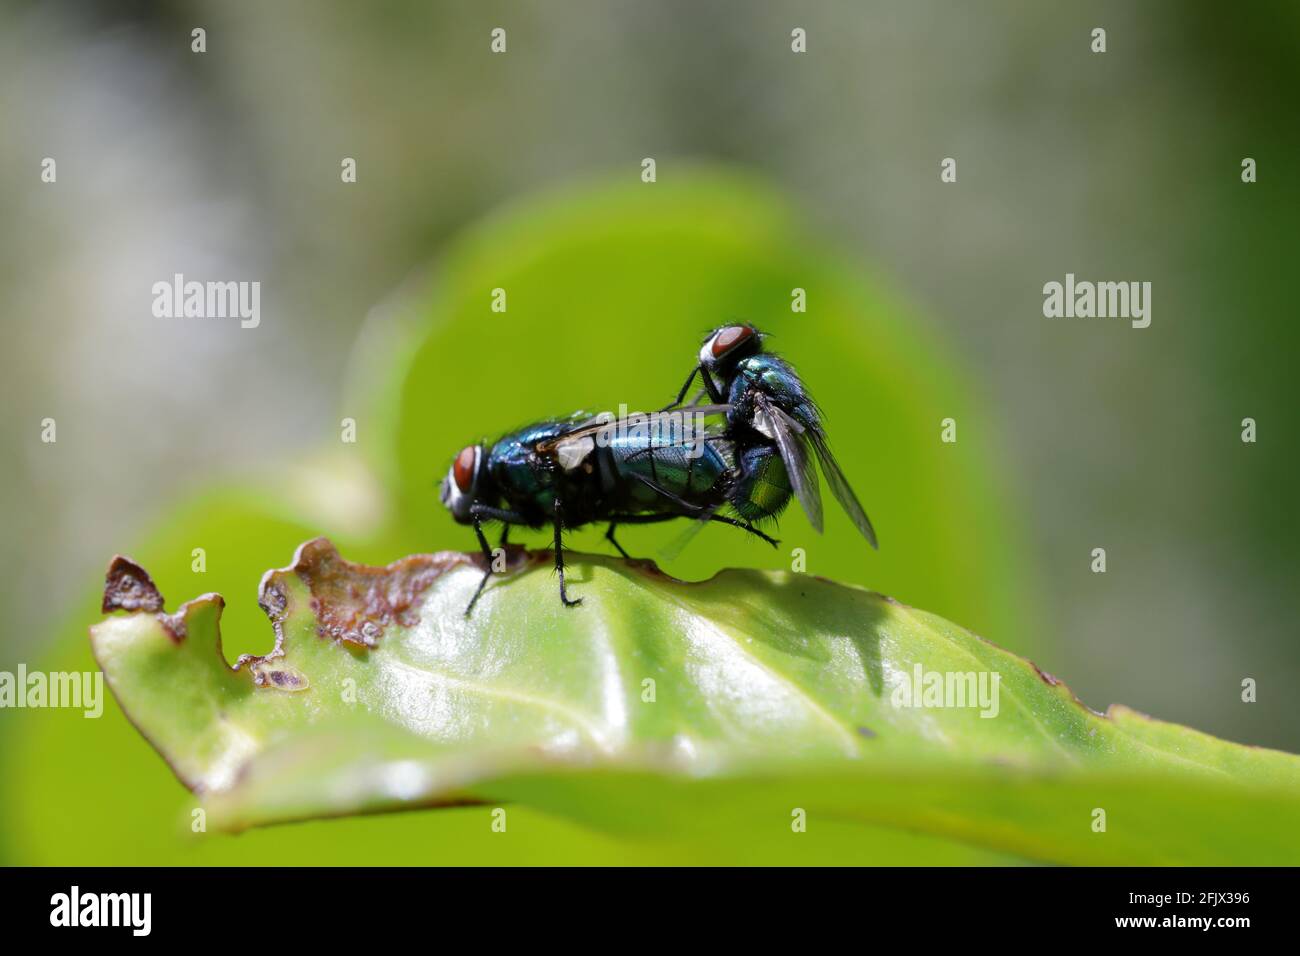 a pair of mating blue bottle flies(Calliphora vomitoria) on a green leaf Stock Photo